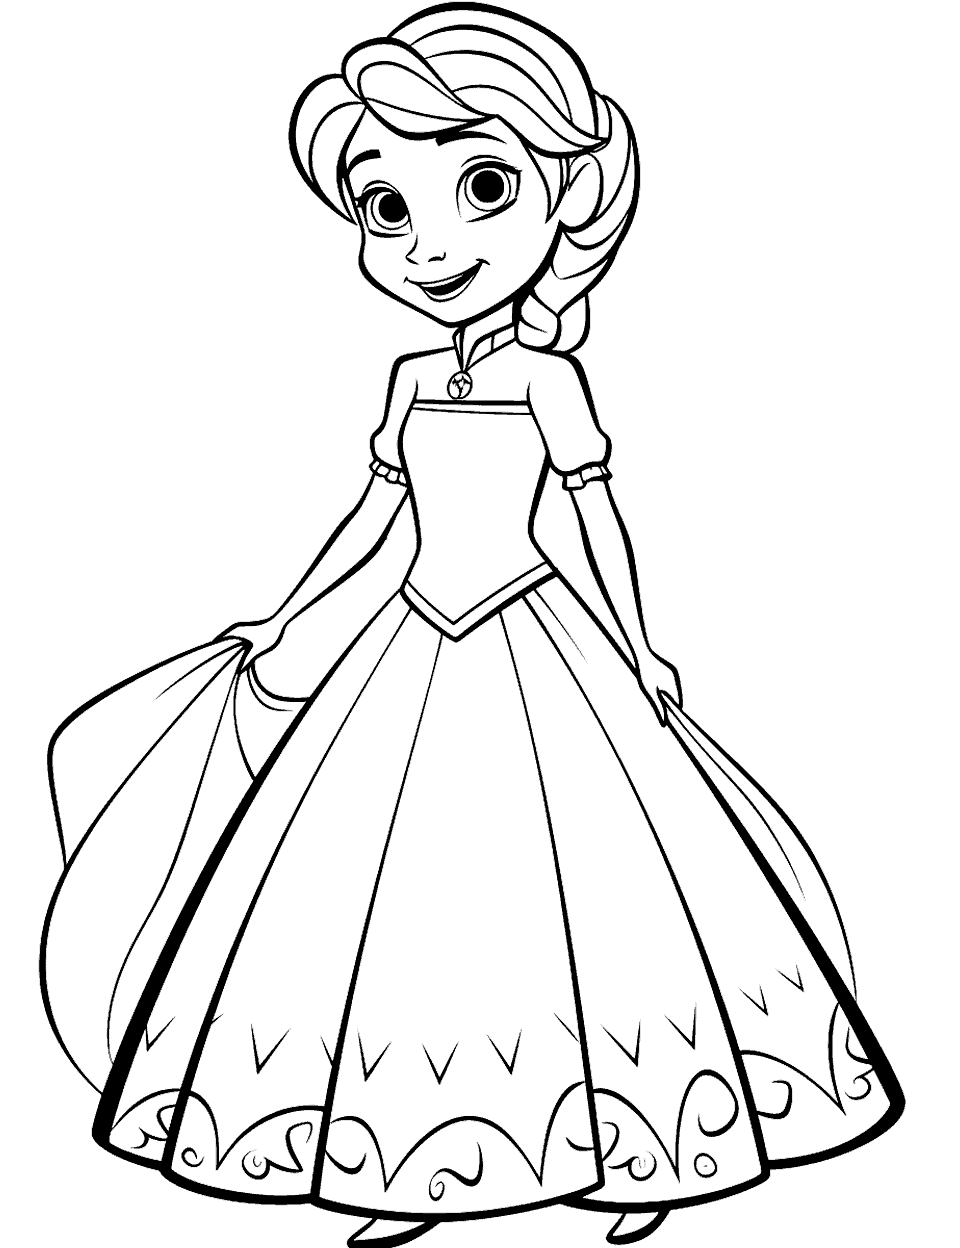 Elsa from Frozen Coloring Page - Elsa from Frozen wearing her iconic dress.